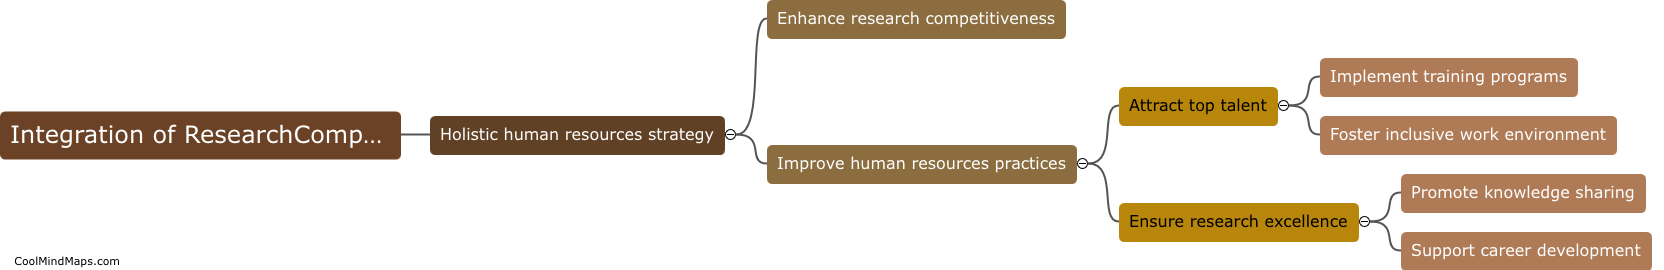 How does the integration of ResearchComp and HRS4R create a holistic human resources strategy?